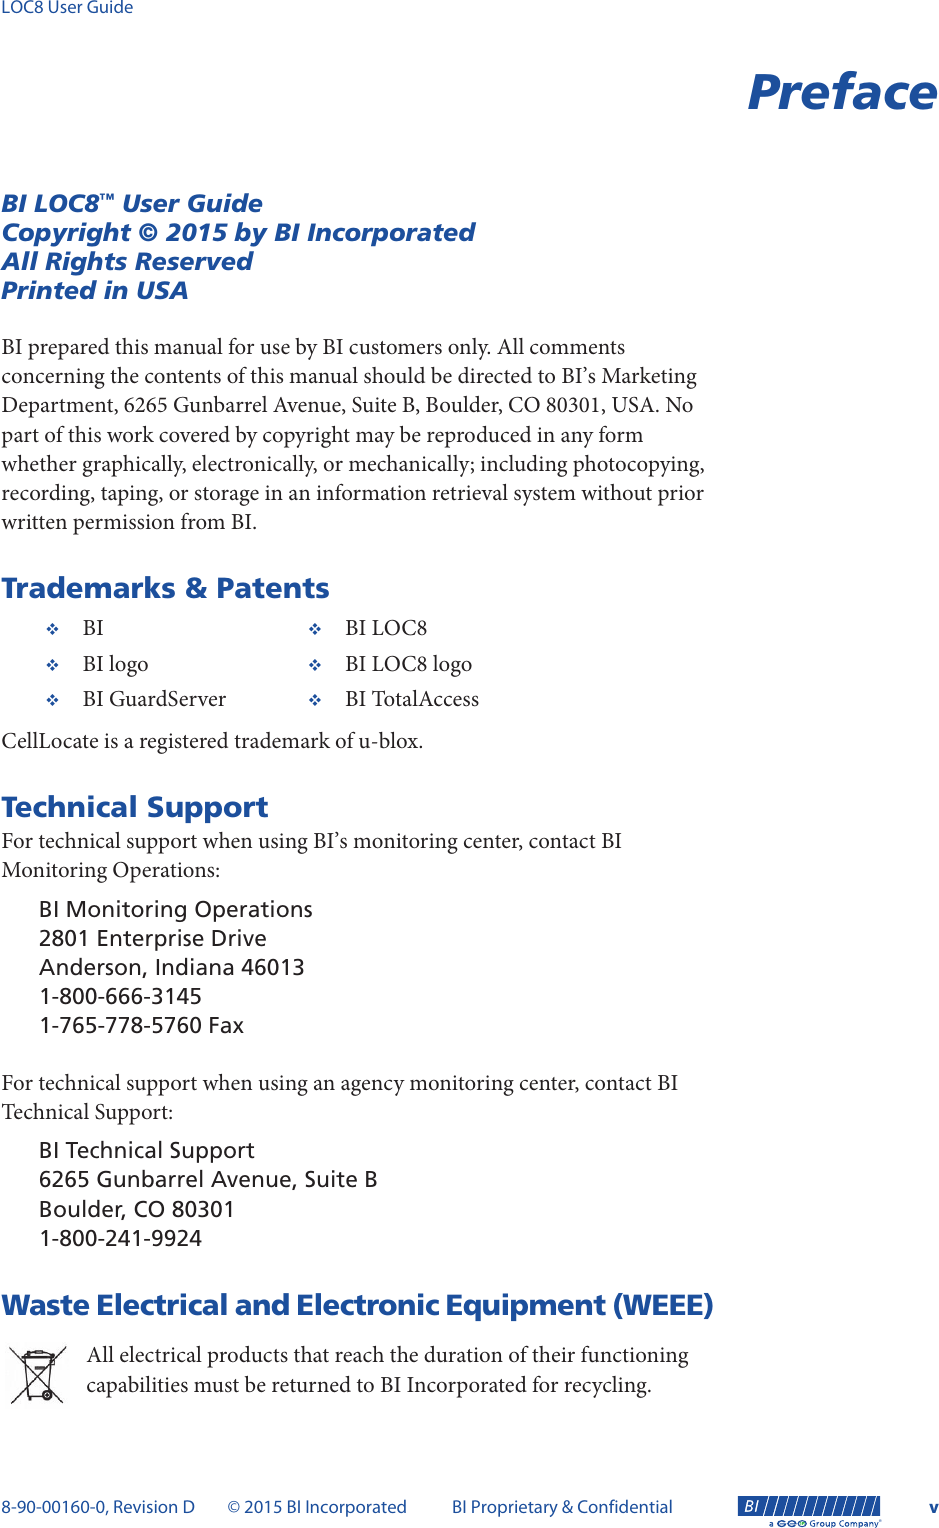 LOC8 User Guide8-90-00160-0, Revision D © 2015 BI Incorporated BI Proprietary &amp; Confidential v®PrefaceBI LOC8™ User GuideCopyright © 2015 by BI IncorporatedAll Rights ReservedPrinted in USABI prepared this manual for use by BI customers only. All comments concerning the contents of this manual should be directed to BI’s Marketing Department, 6265 Gunbarrel Avenue, Suite B, Boulder, CO 80301, USA. No part of this work covered by copyright may be reproduced in any form whether graphically, electronically, or mechanically; including photocopying, recording, taping, or storage in an information retrieval system without prior written permission from BI.Trademarks &amp; PatentsCellLocate is a registered trademark of u-blox.Technical SupportFor technical support when using BI’s monitoring center, contact BI Monitoring Operations:BI Monitoring Operations2801 Enterprise DriveAnderson, Indiana 460131-800-666-31451-765-778-5760 FaxFor technical support when using an agency monitoring center, contact BI Technical Support:BI Technical Support6265 Gunbarrel Avenue, Suite BBoulder, CO 803011-800-241-9924Waste Electrical and Electronic Equipment (WEEE)All electrical products that reach the duration of their functioning capabilities must be returned to BI Incorporated for recycling. BI BI LOC8BI logo BI LOC8 logoBI GuardServer BI TotalAccess